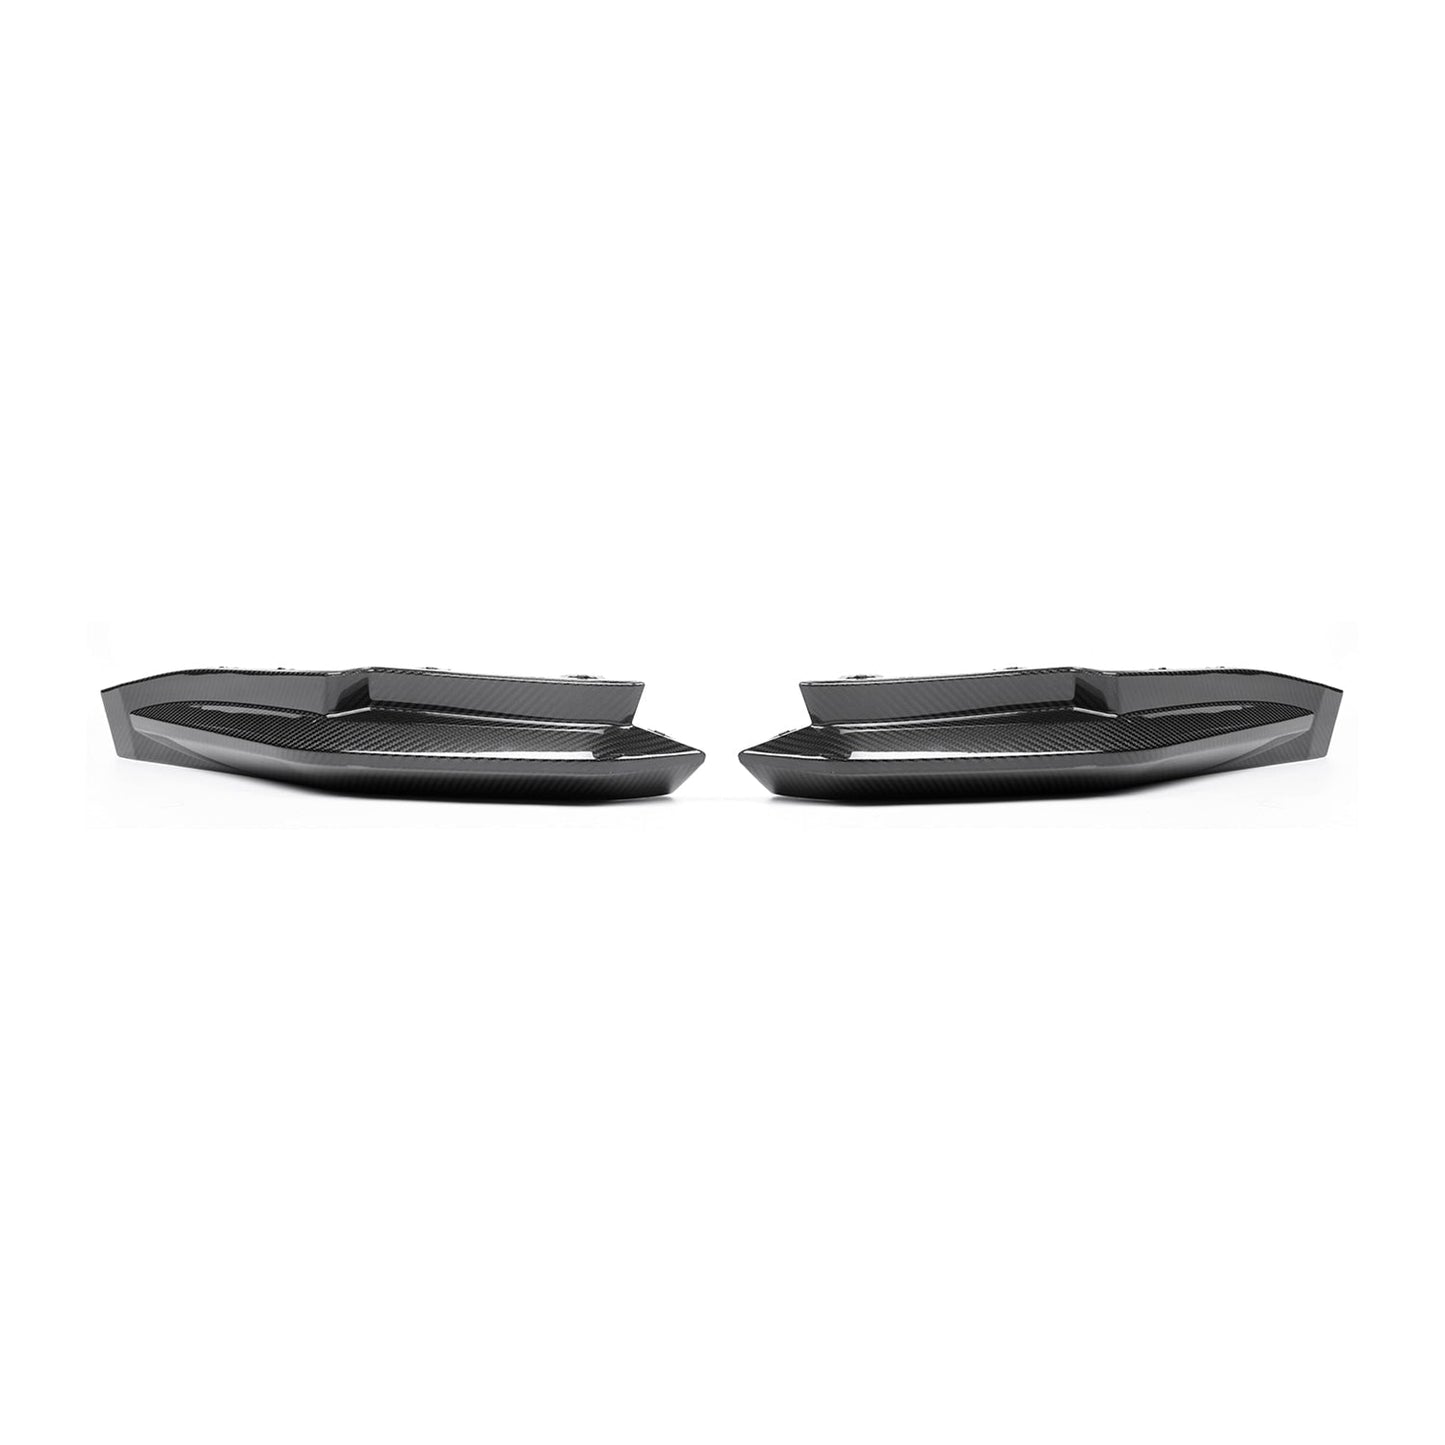 MHC+ BMW M3 OEM Style Replacement Rear Side Diffusers In Pre Preg Carbon Fibre (G80/G81)